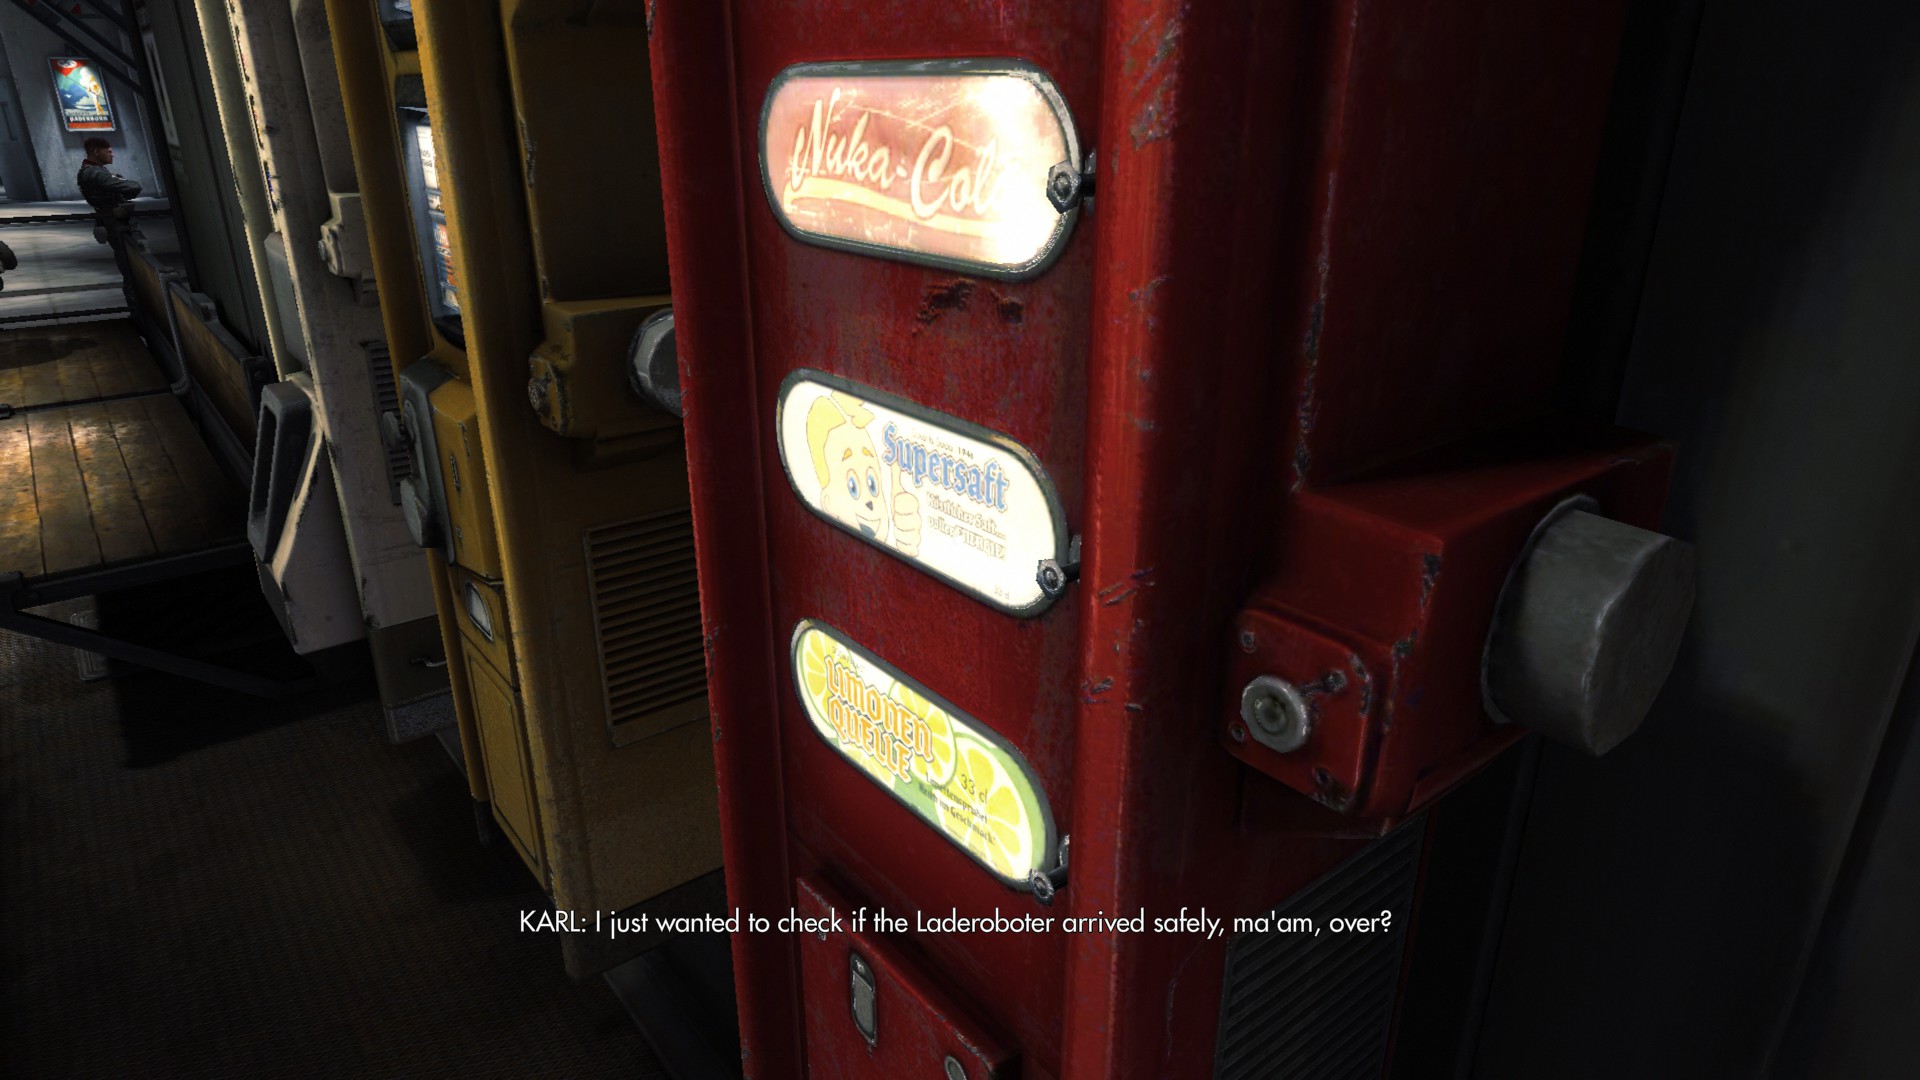 7 Easter Eggs Buried In Wolfenstein: The Old Blood